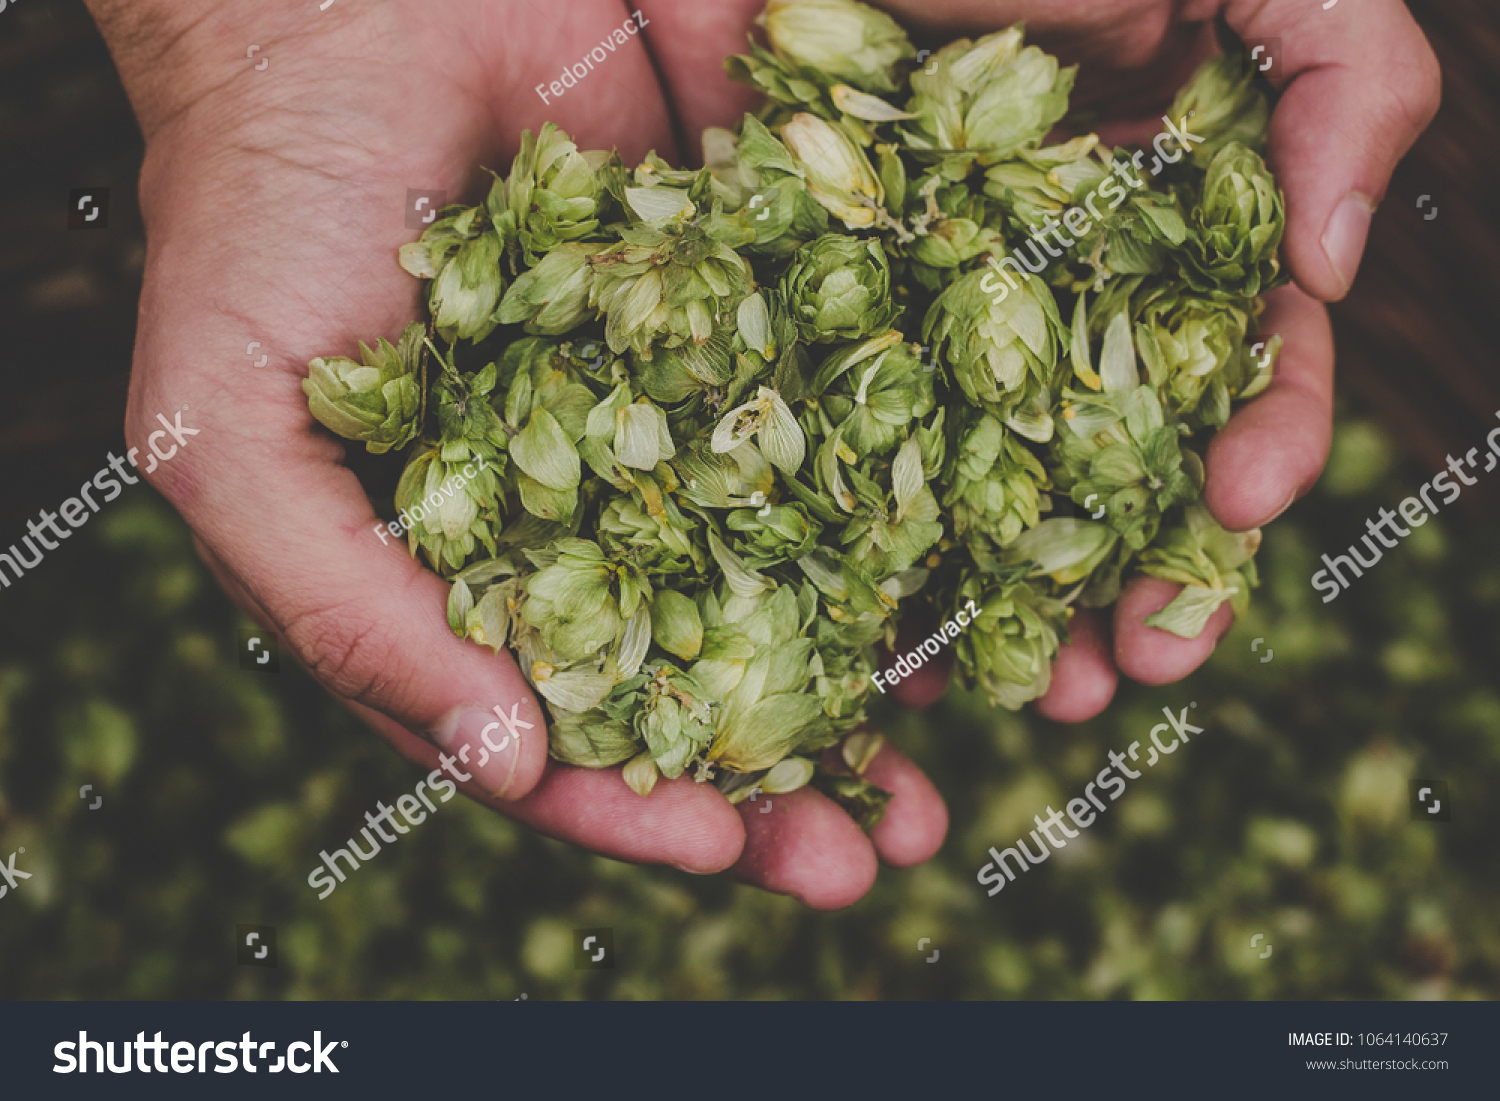 Green hops for beer. Man holding green hop cones. #1064140637